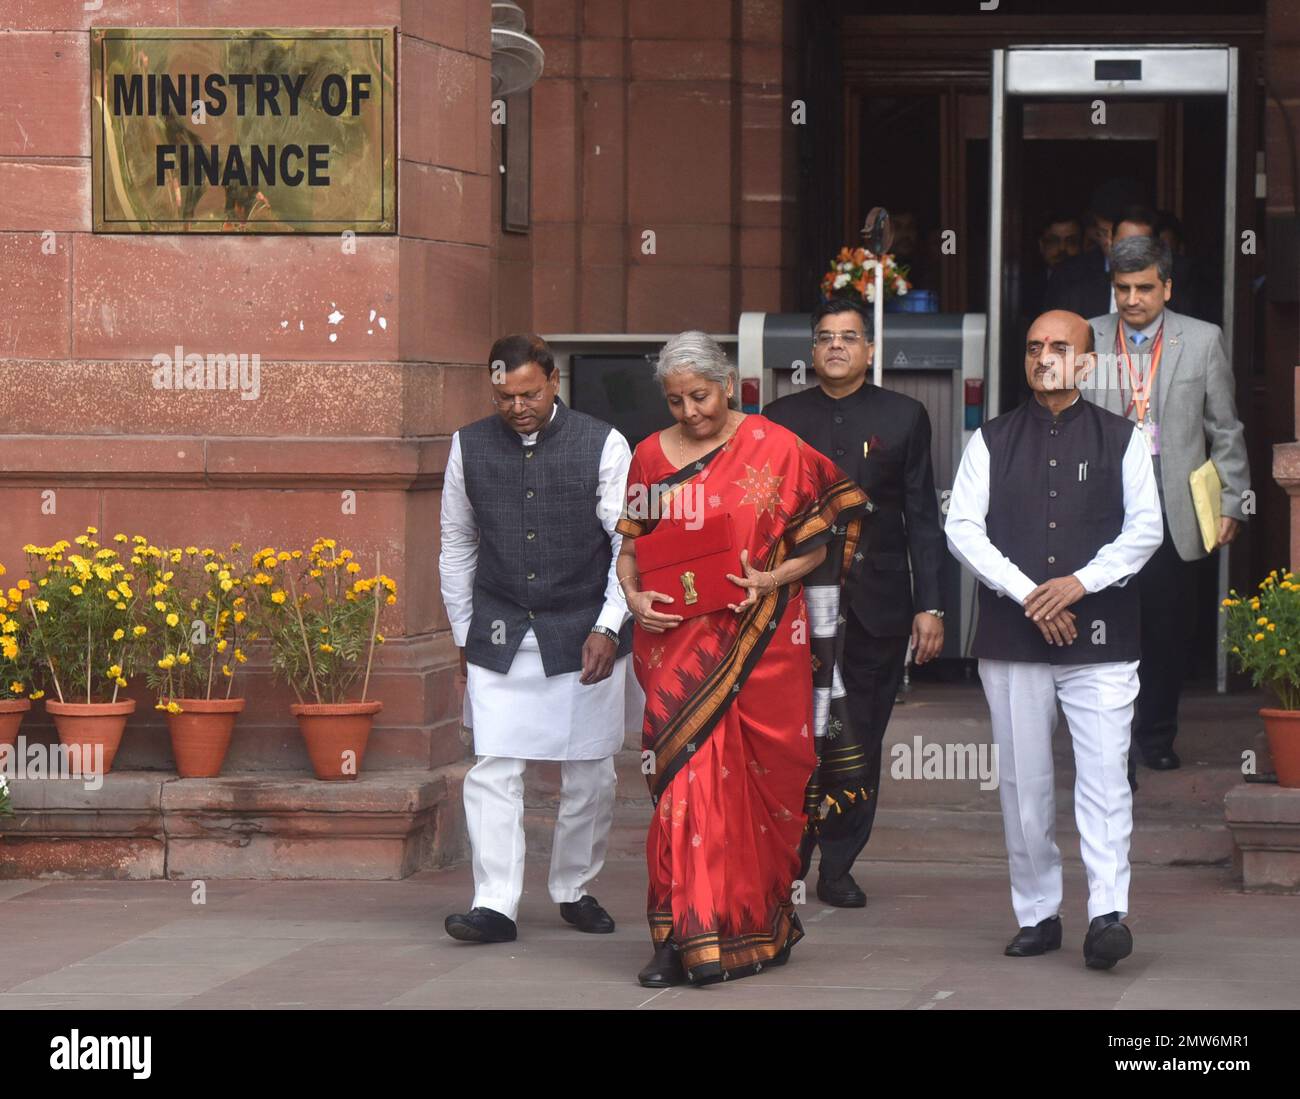 NEW DELHI, INDIA - FEBRUARY 1: Union Finance Minister Nirmala Sitharaman with Ministers of State Bhagwat Kishanrao Karad and Pankaj Chaudhary and officials poses for photographs outside the Finance Ministry ahead of the presentation of the Union Budget 2023-24 at North Block, on February 1, 2023 in New Delhi, India. Nirmala Sitharaman presented the last full-fledged Union Budget of the Modi government before the 2024 Lok Sabha elections. The government sweetened the new income tax regime by making income of up to ?3 lakh exempt from income tax. With a rebate, now people earning up to ?7 lakh n Stock Photo